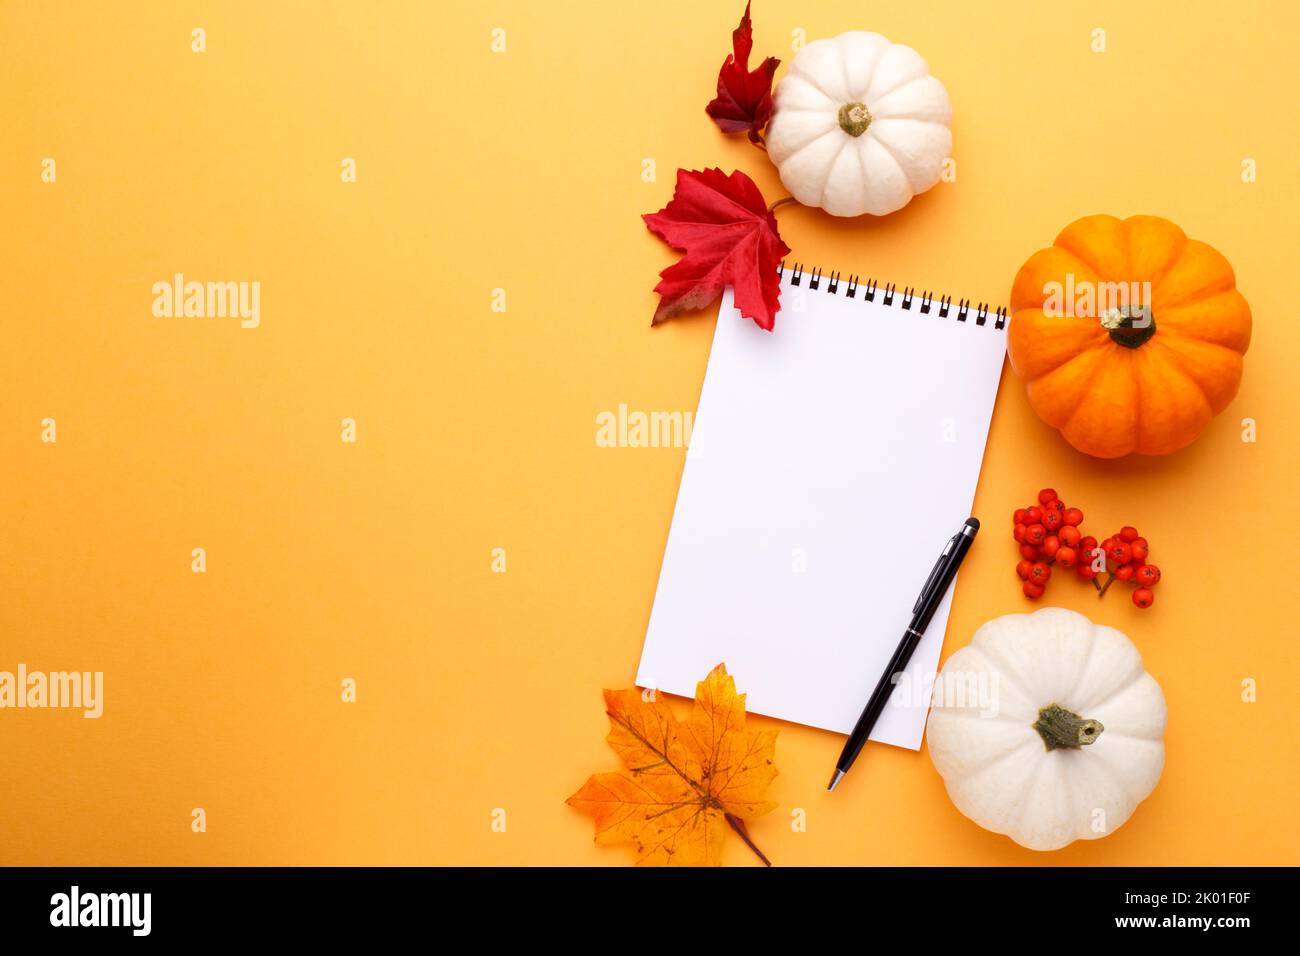 White and orange decorative pumpkins and notepad with pen on the orange background, flat lay with copy space Stock Photo